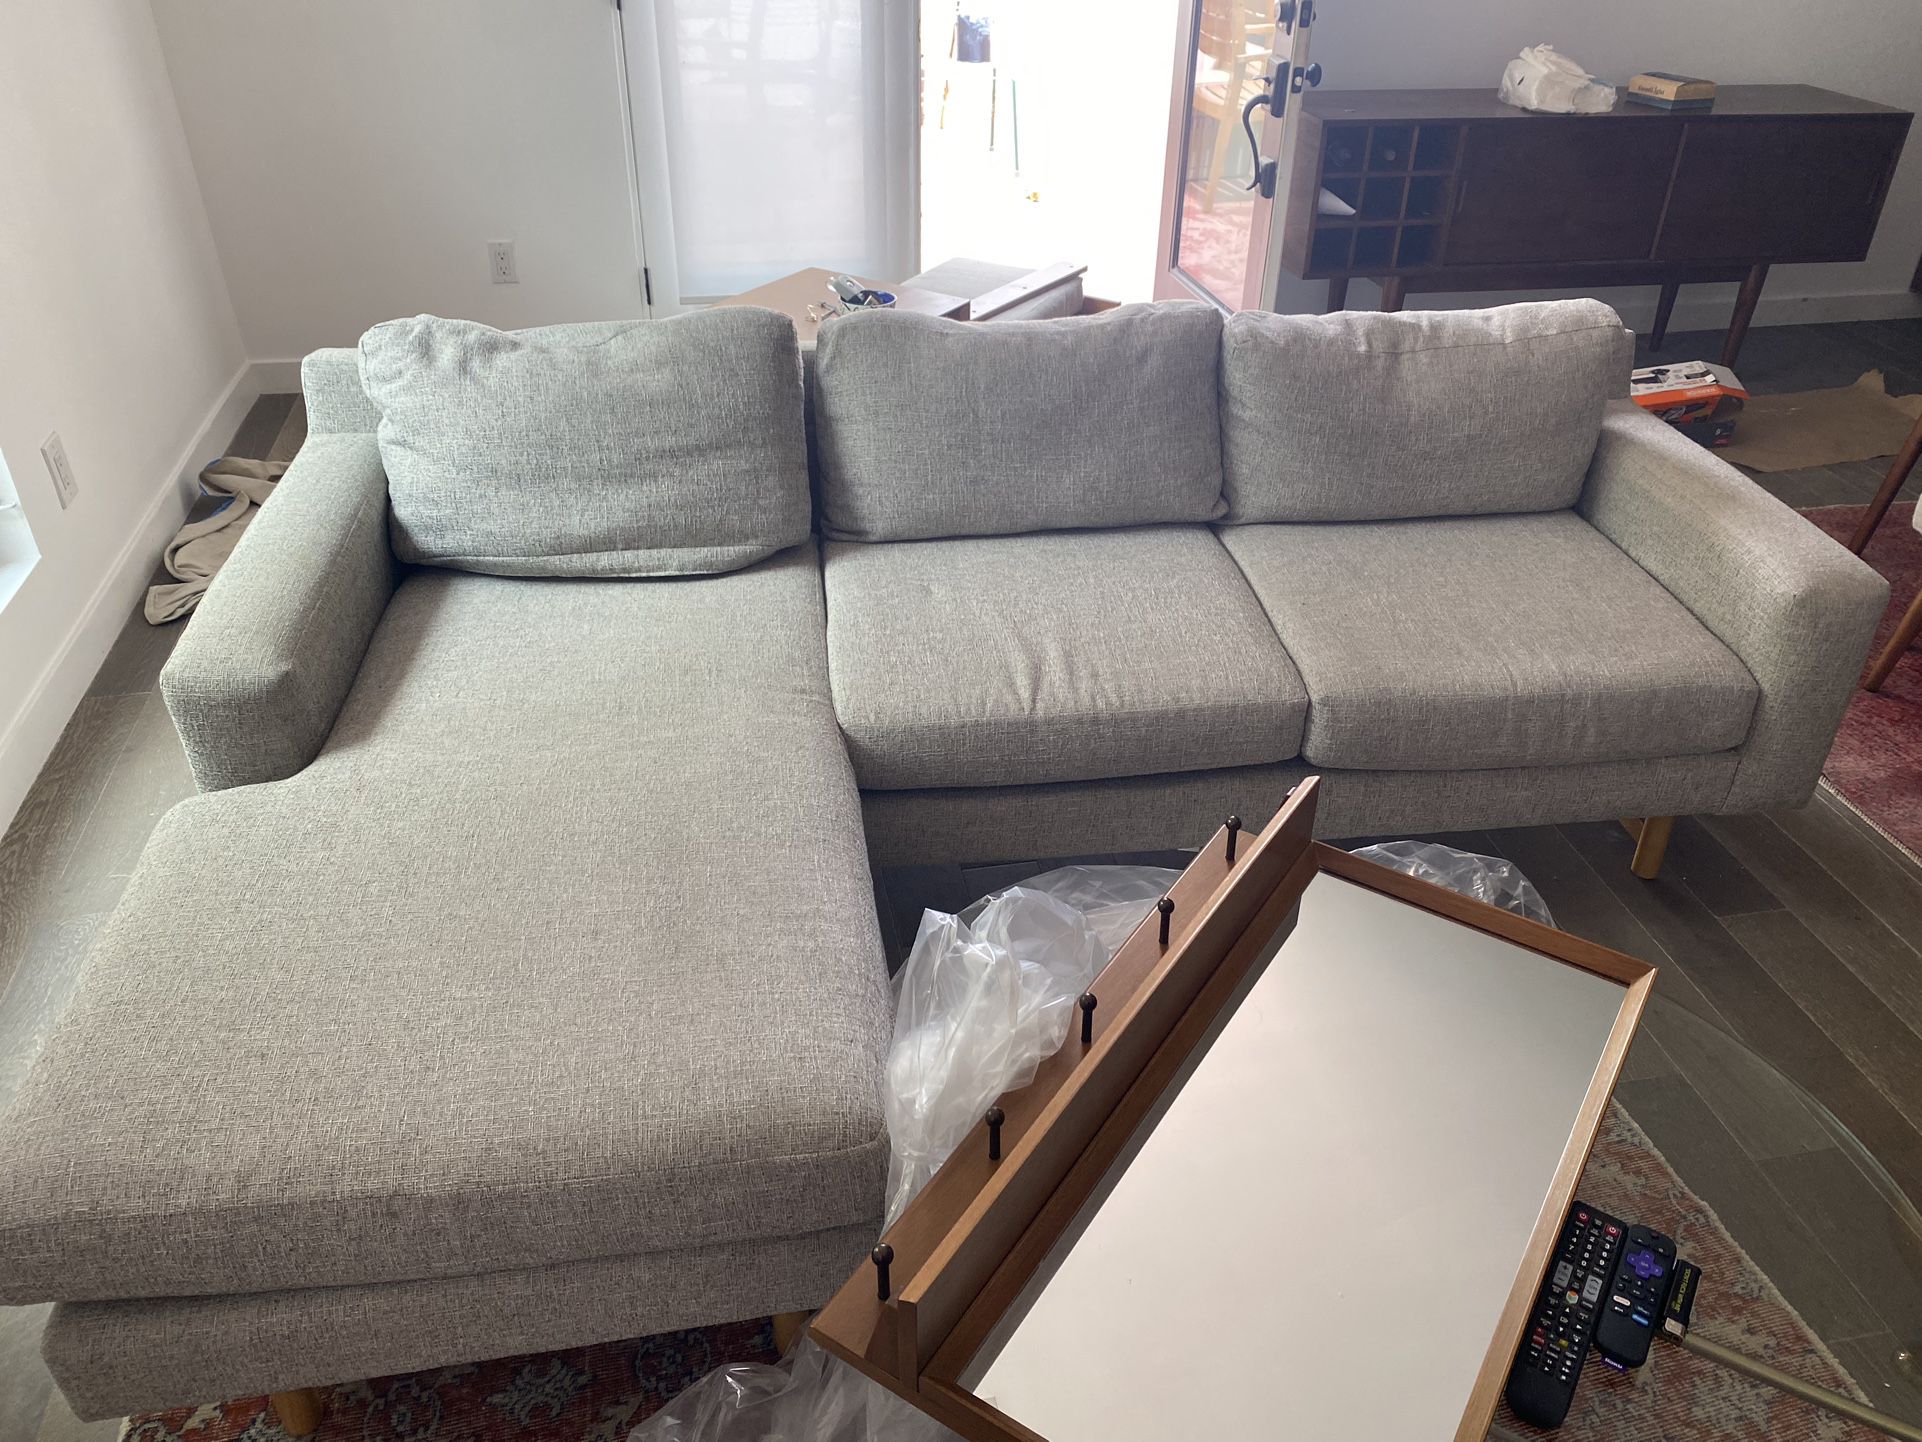 FREE West Elm couch 